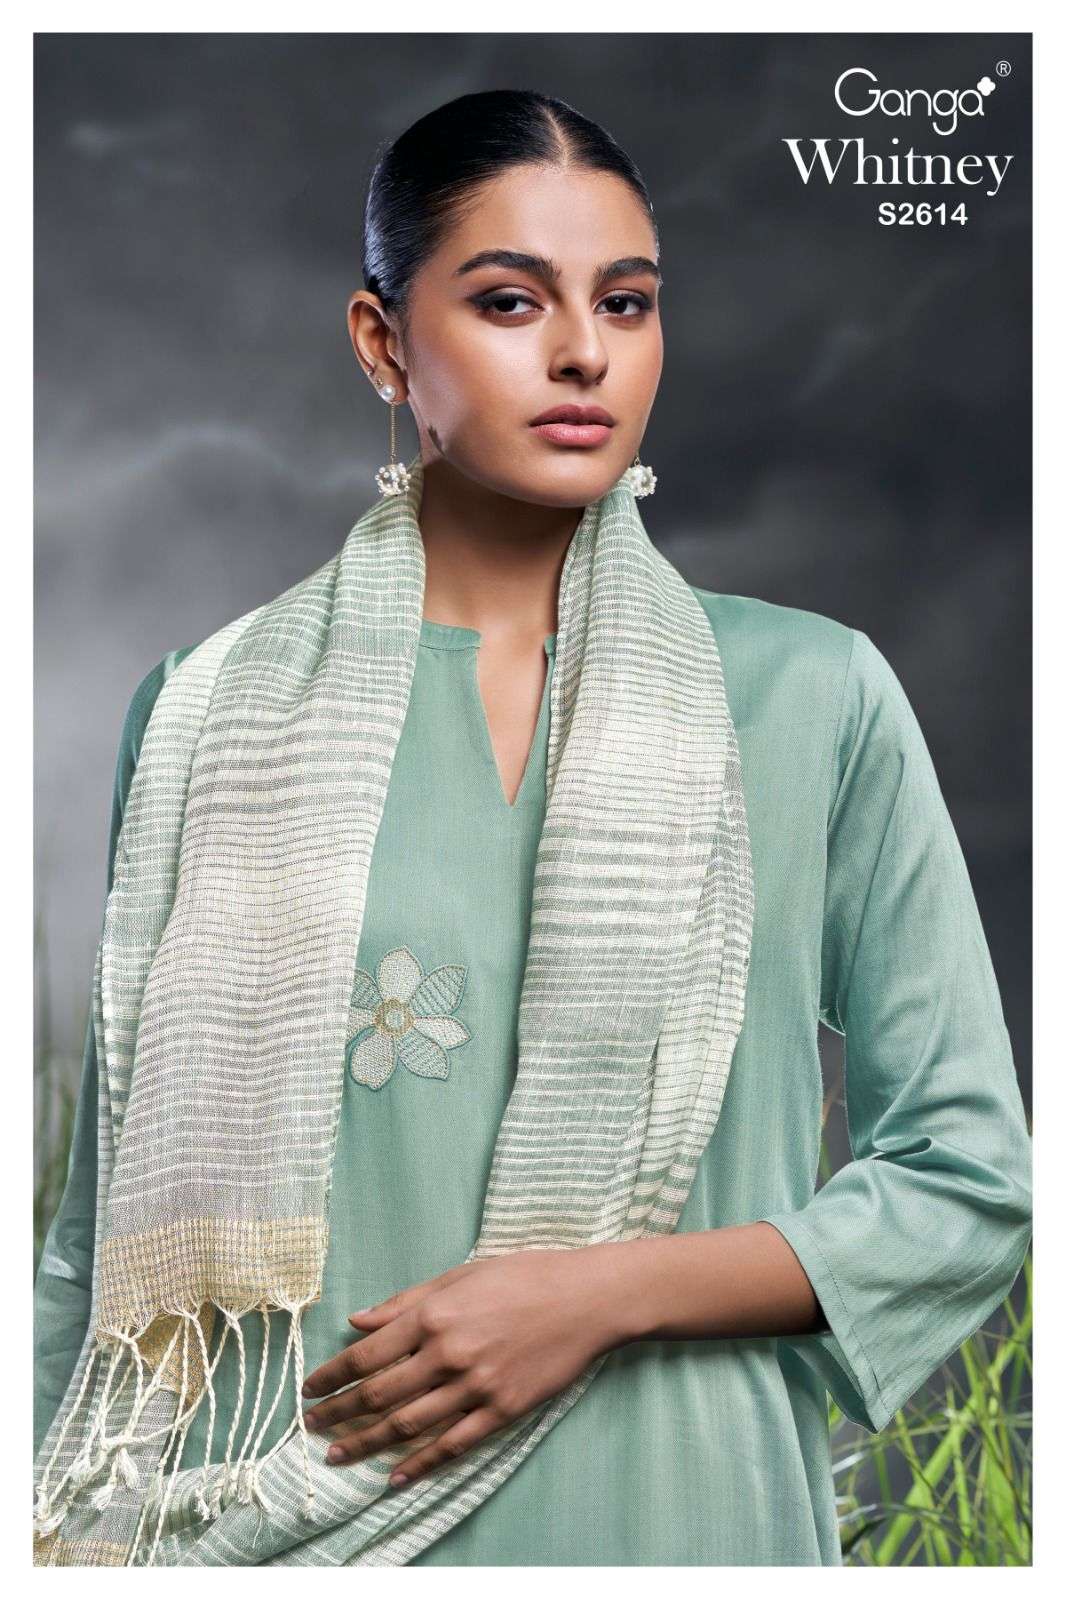 Ganga Whitney 2614 Exclusive Cotton Salwar Suits Catalog New Collection